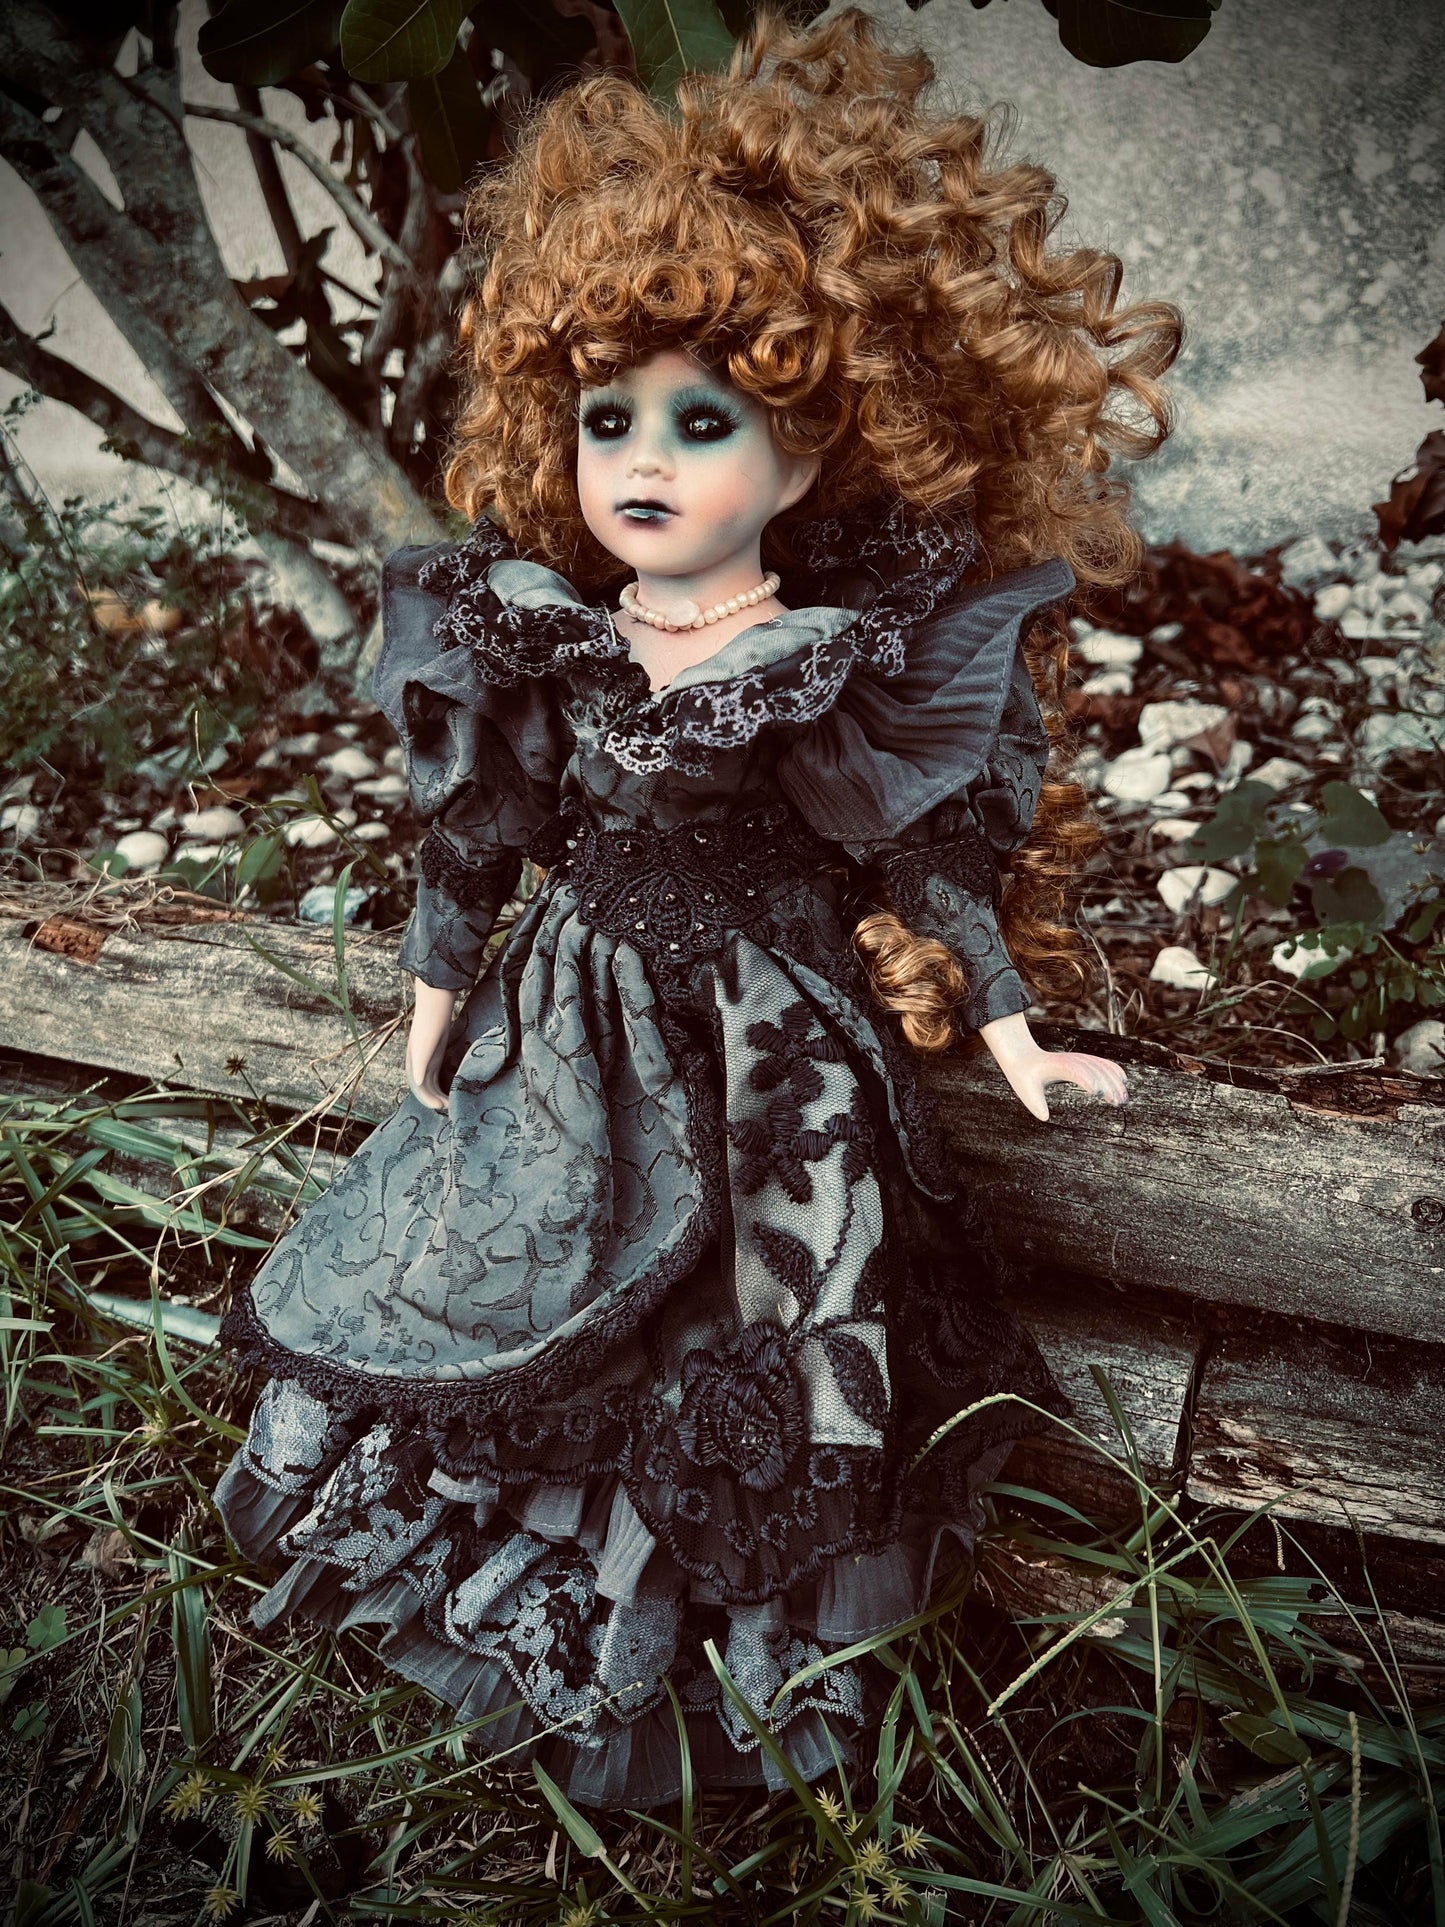 Meet Norma 16" Doll Porcelain Witchy Creepy Haunted Spirit Infected Scary Poltergeist Spooky Zombie Possessed Fall Gothic Positive Energy